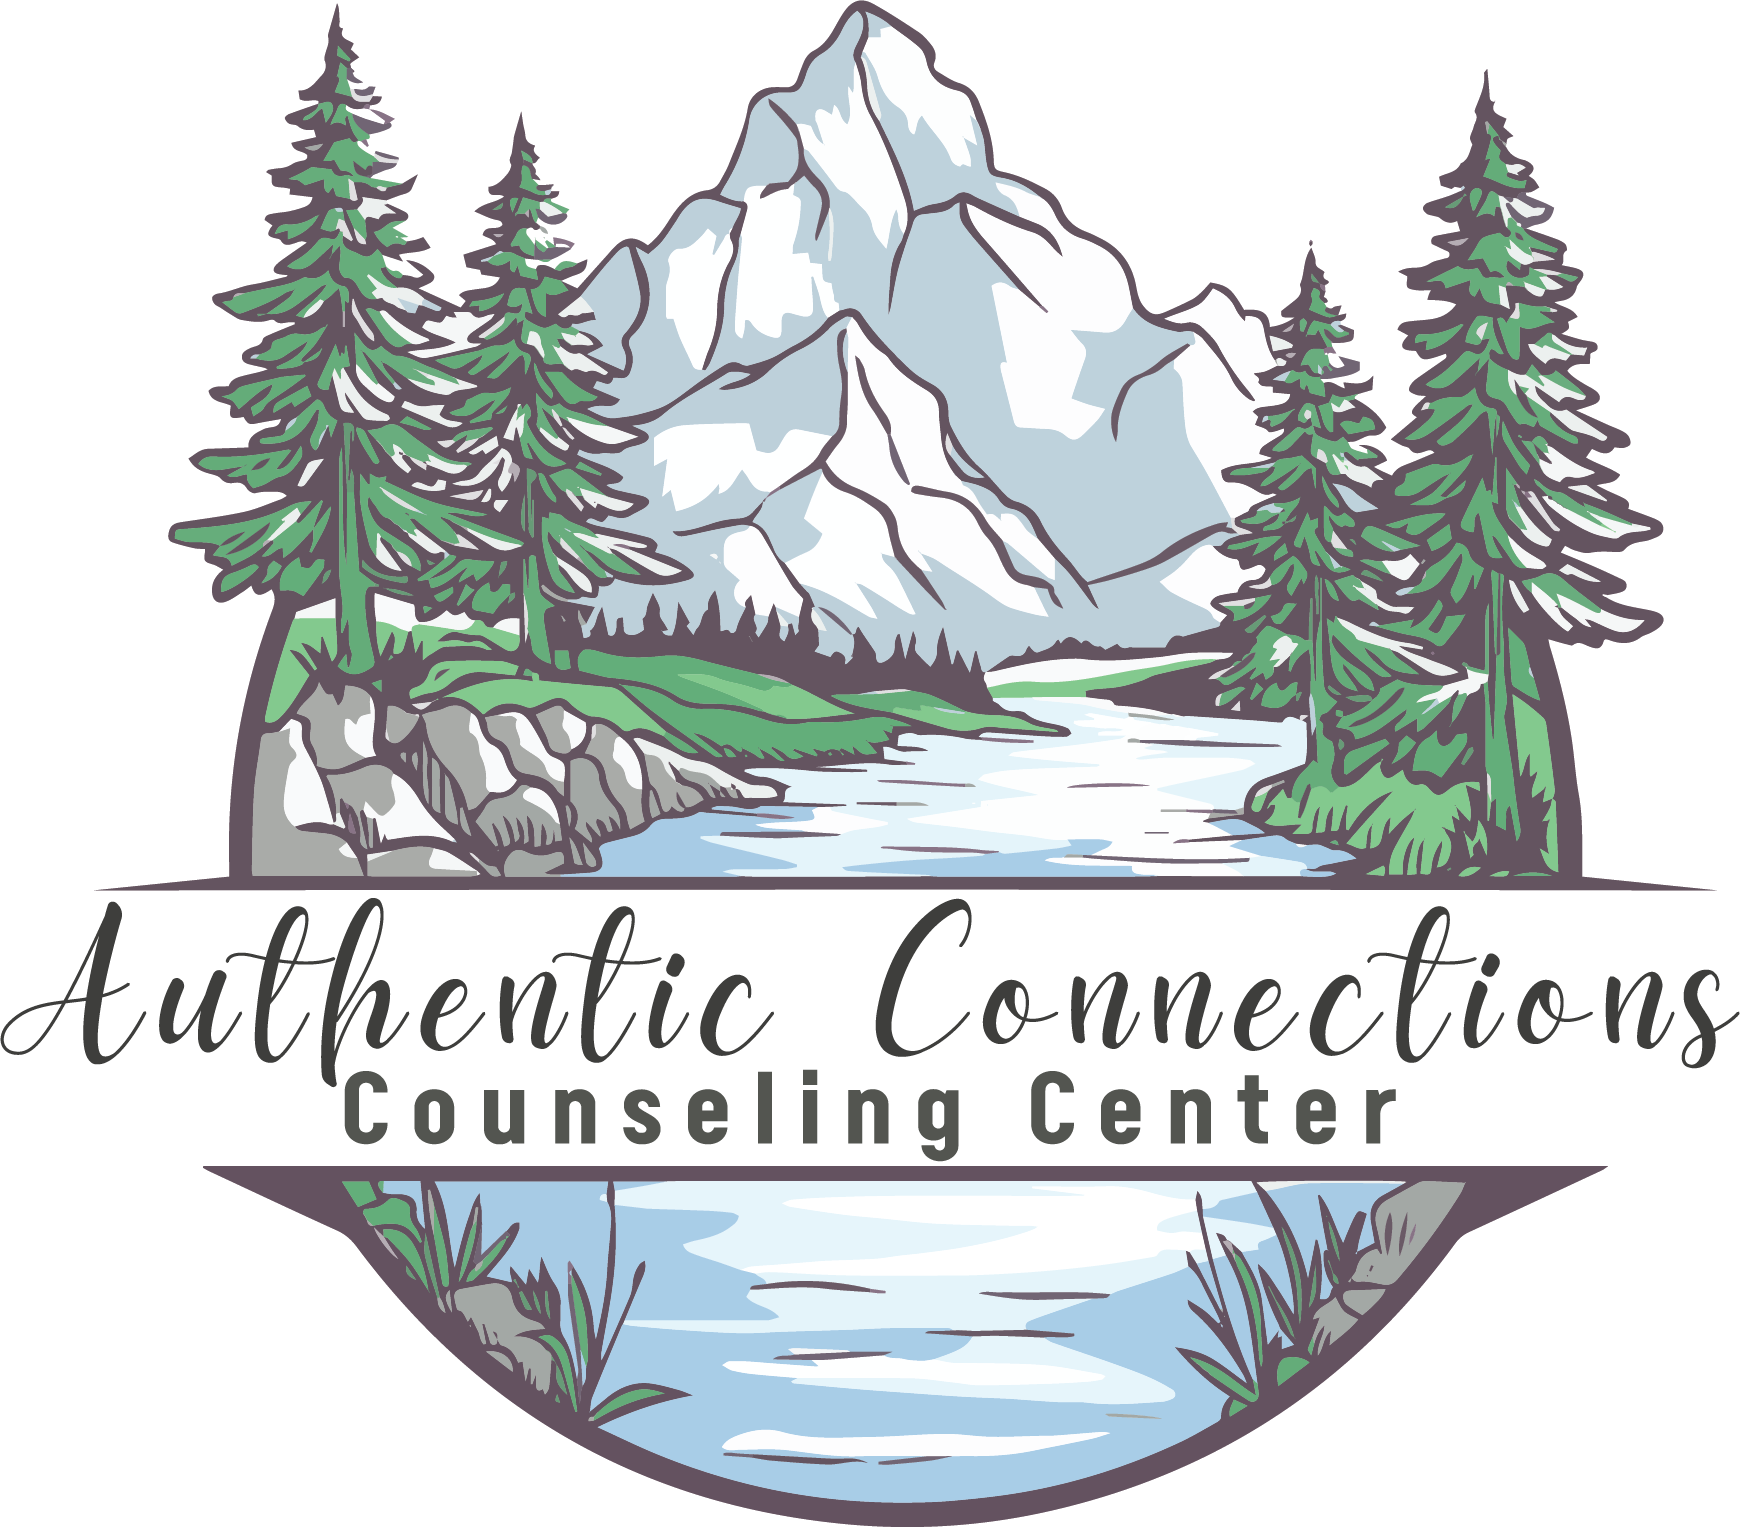 Authentic Connections Counseling Center